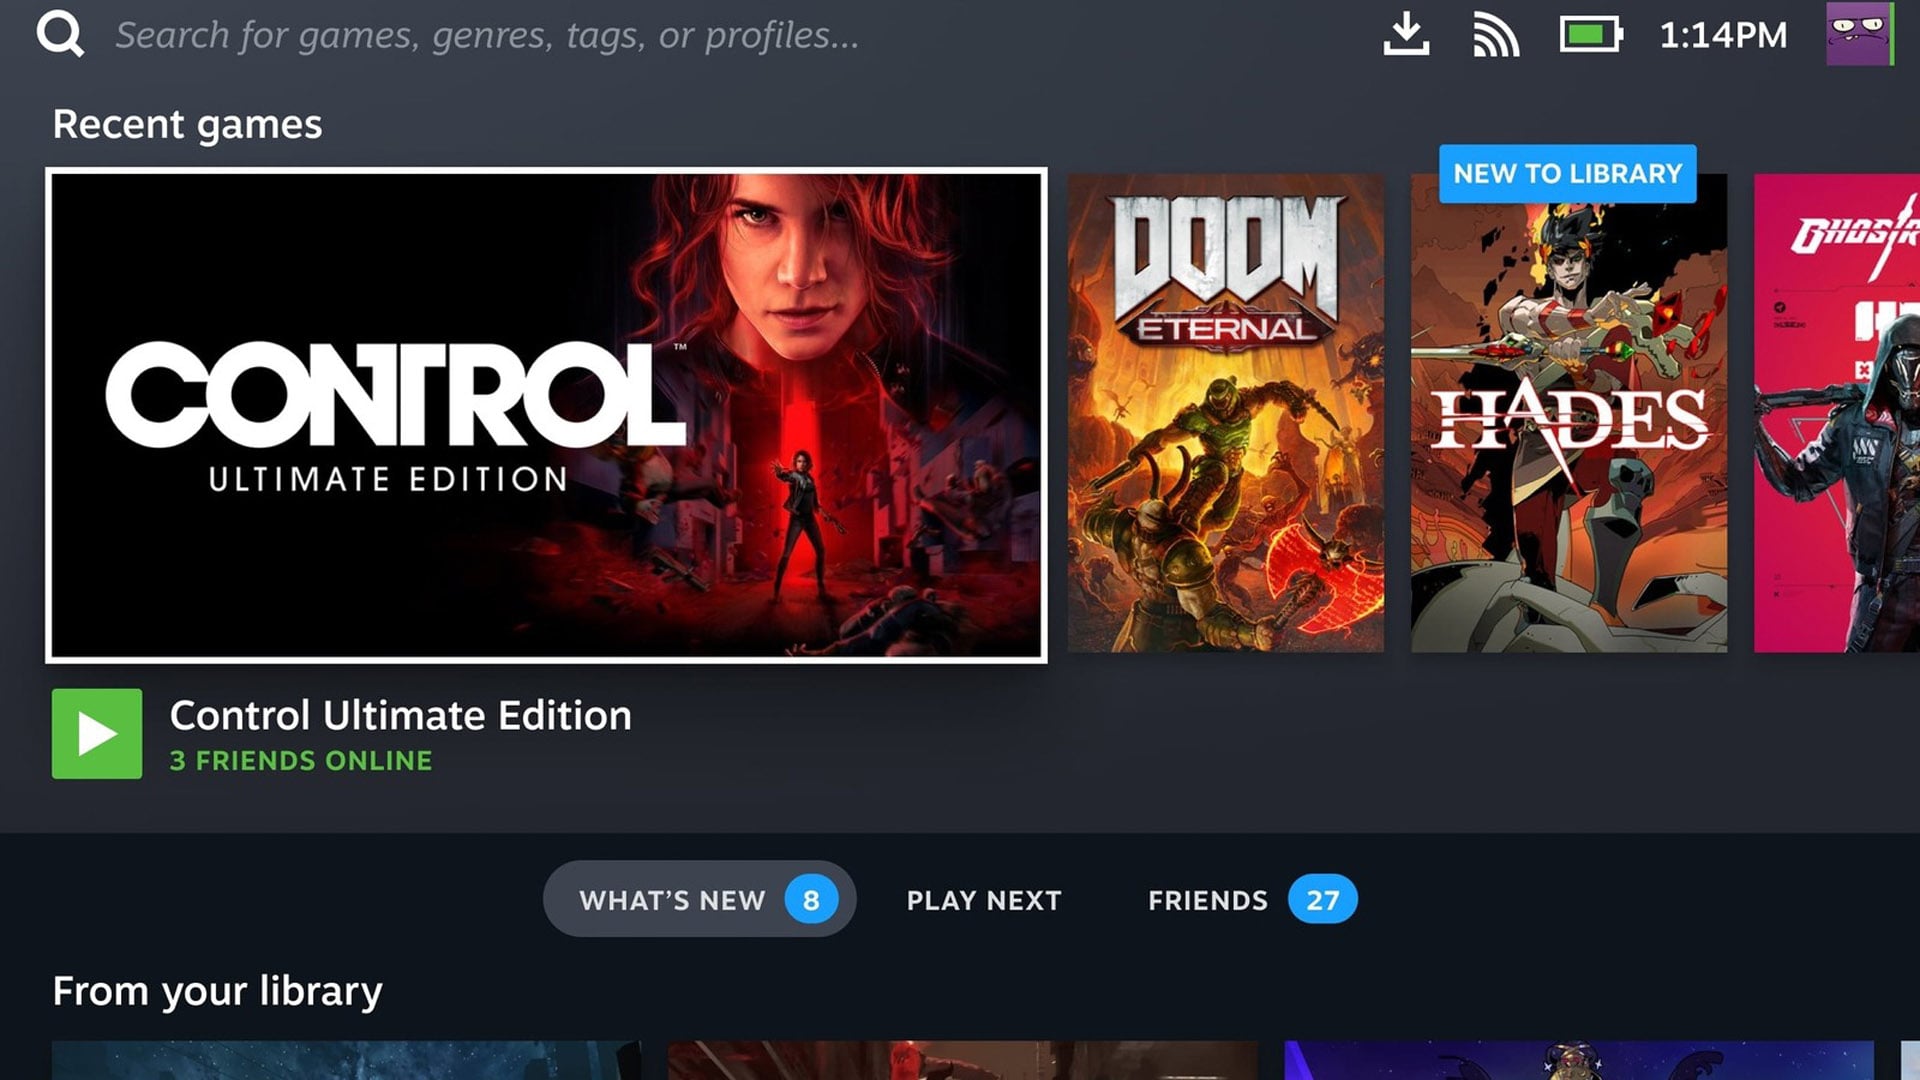 SteamOS 3 user interface showcasing the gaming dashboard